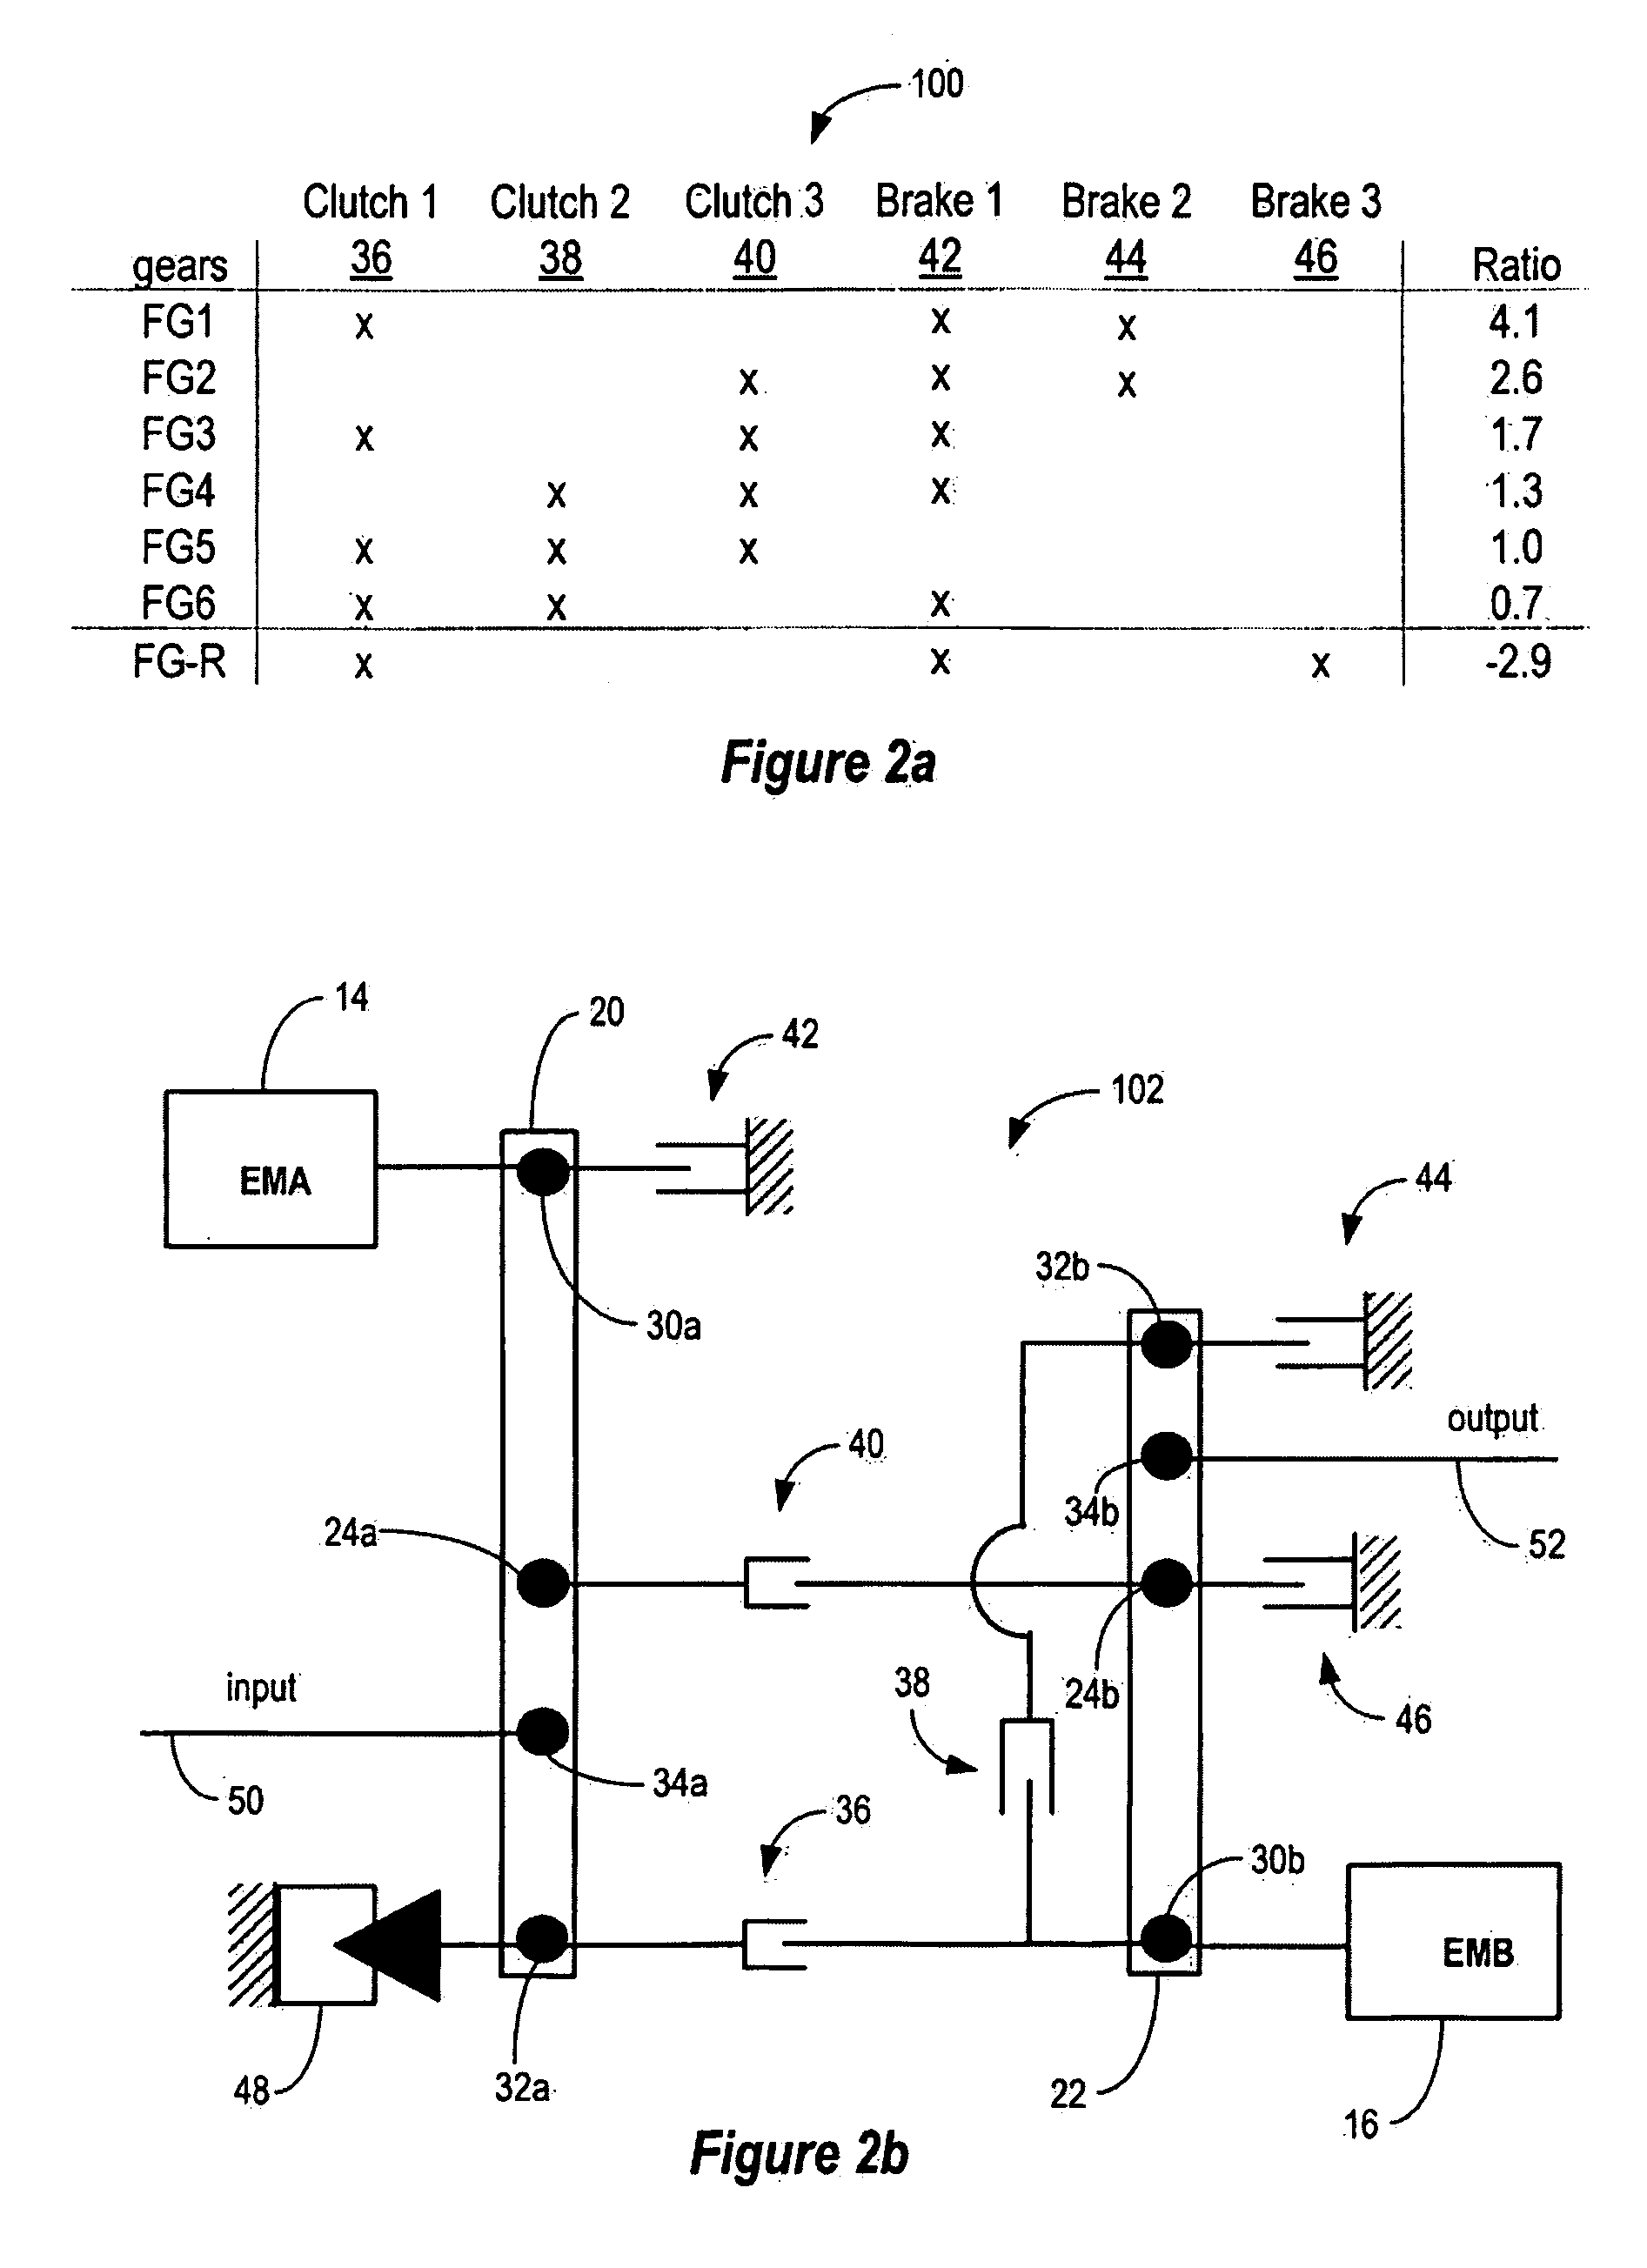 Semi-power split hybrid transmission with multiple modes and fixed gears